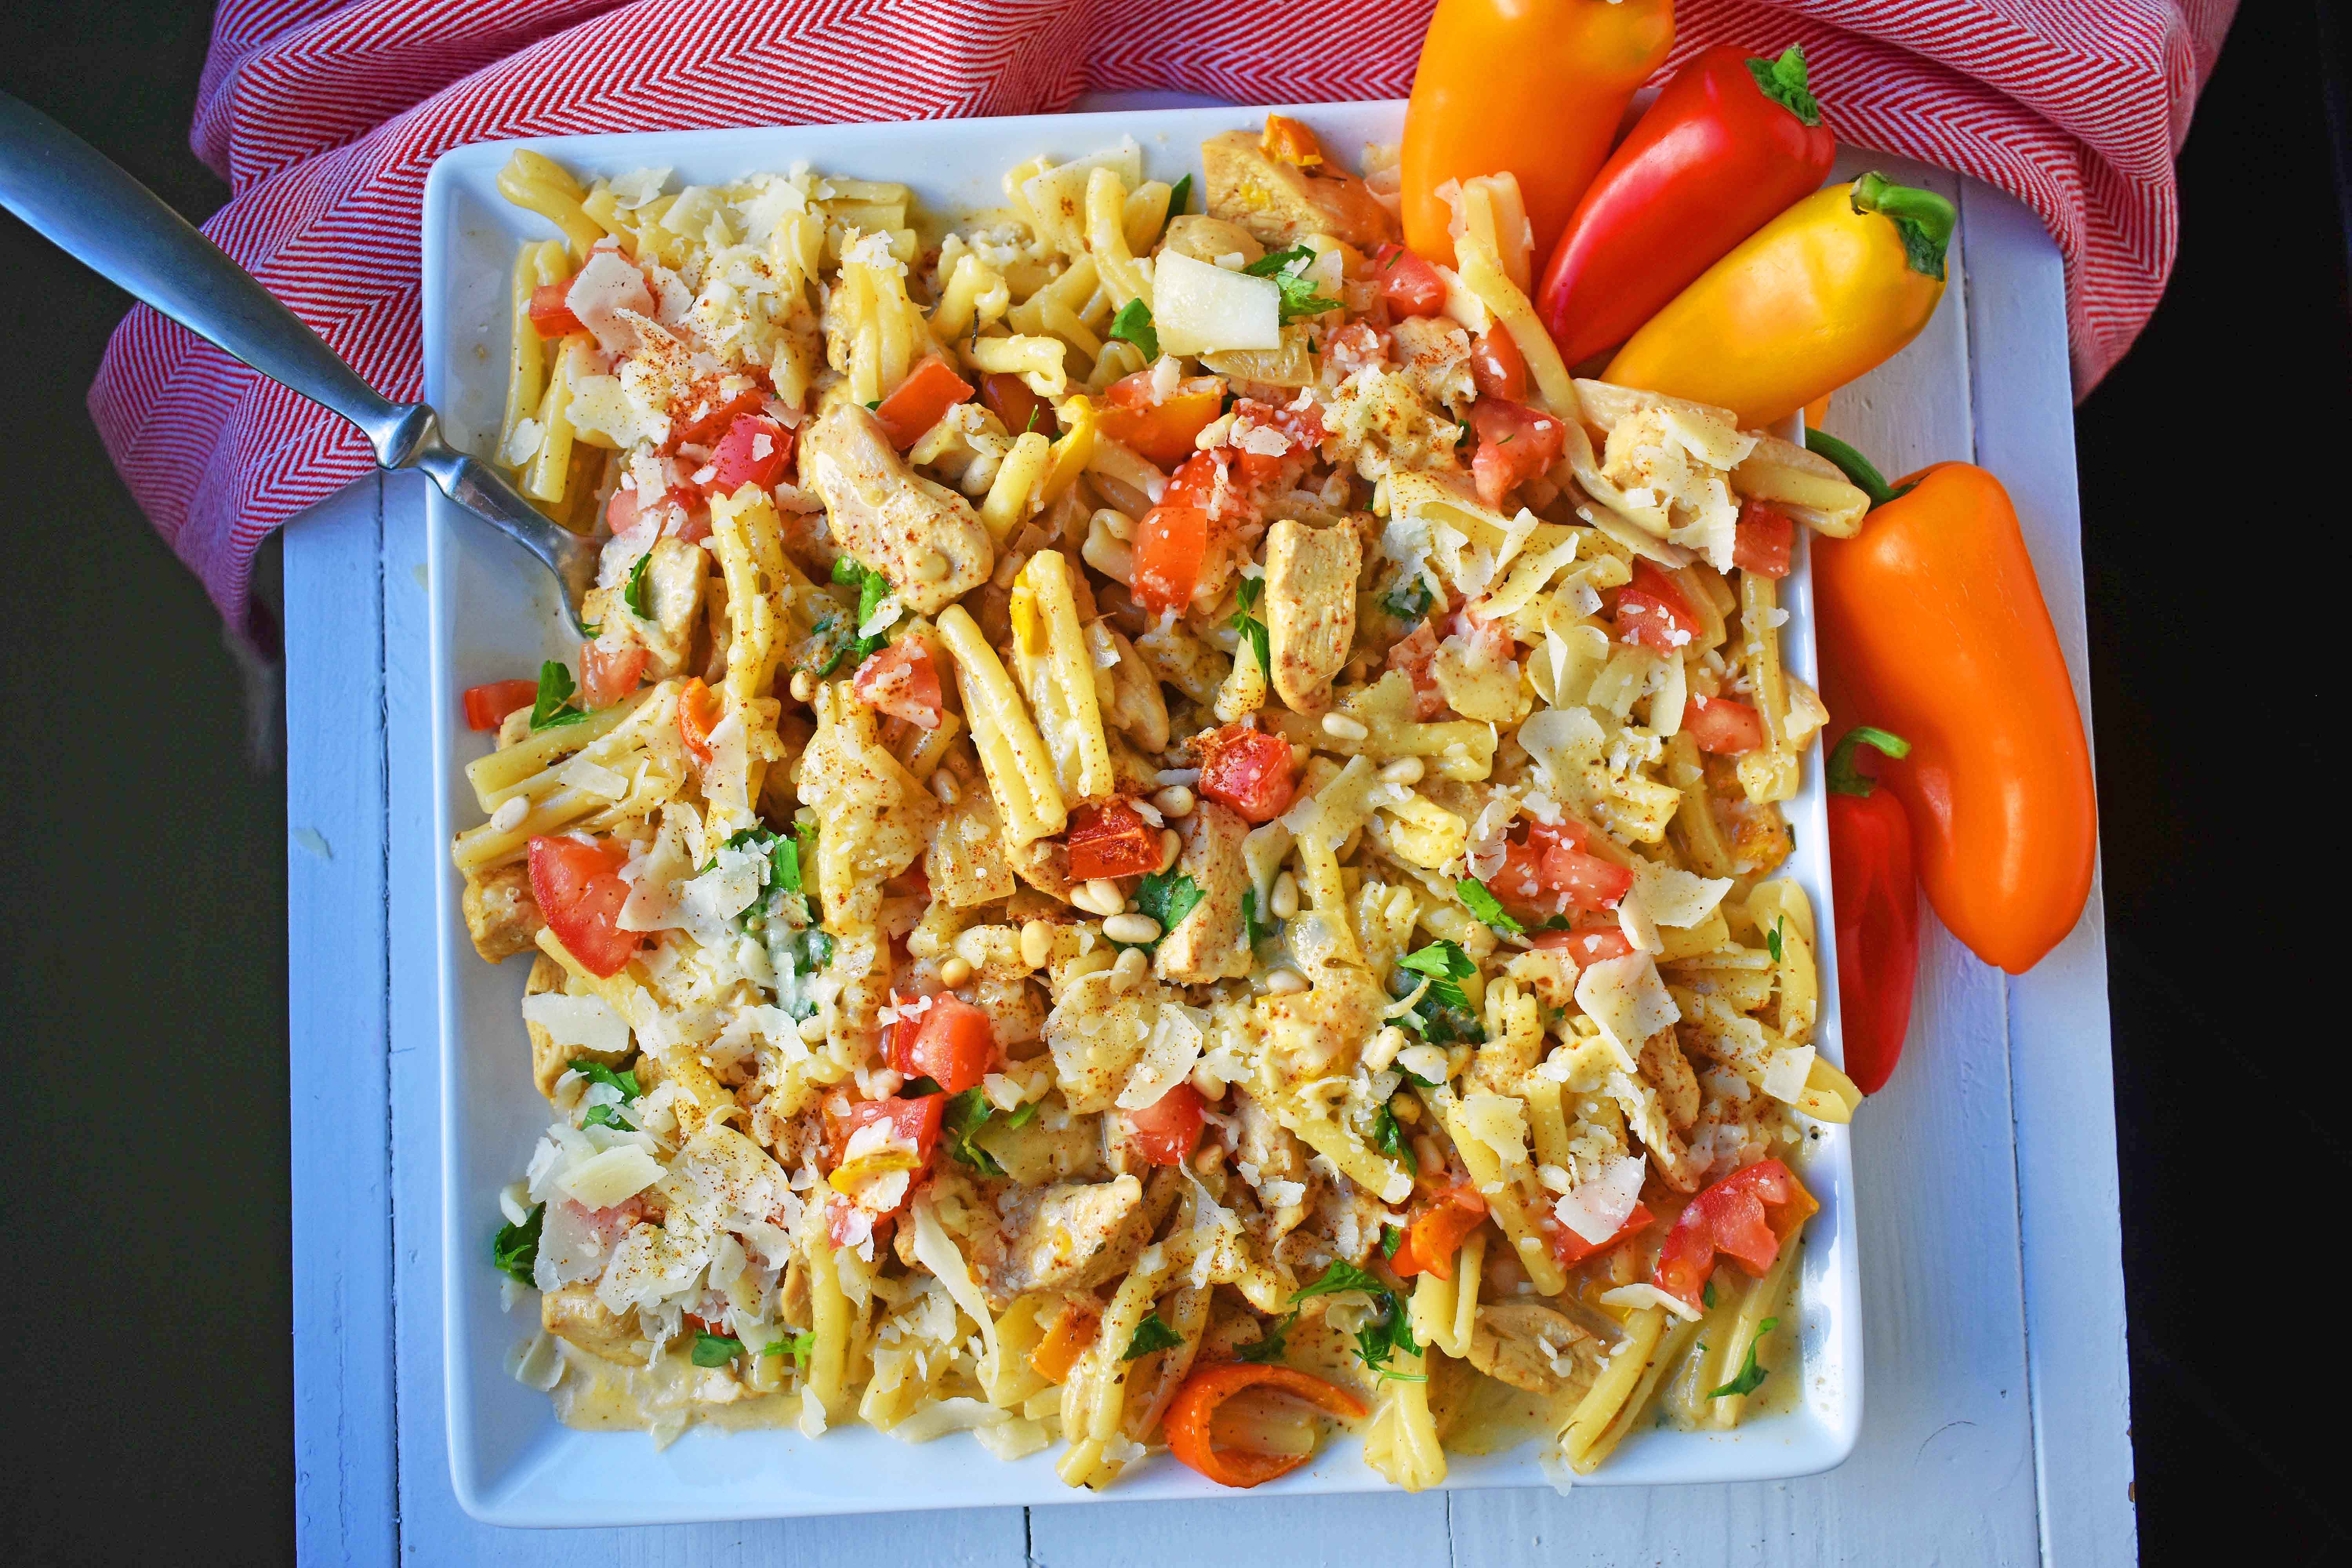 Cajun Louisiana Chicken Pasta made with onions, peppers, chicken, and cajun cream tossed with your favorite kind of pasta and topped with parmesan cheese and pine nuts. A super flavorful creamy pasta dish. www.modernhoney.com